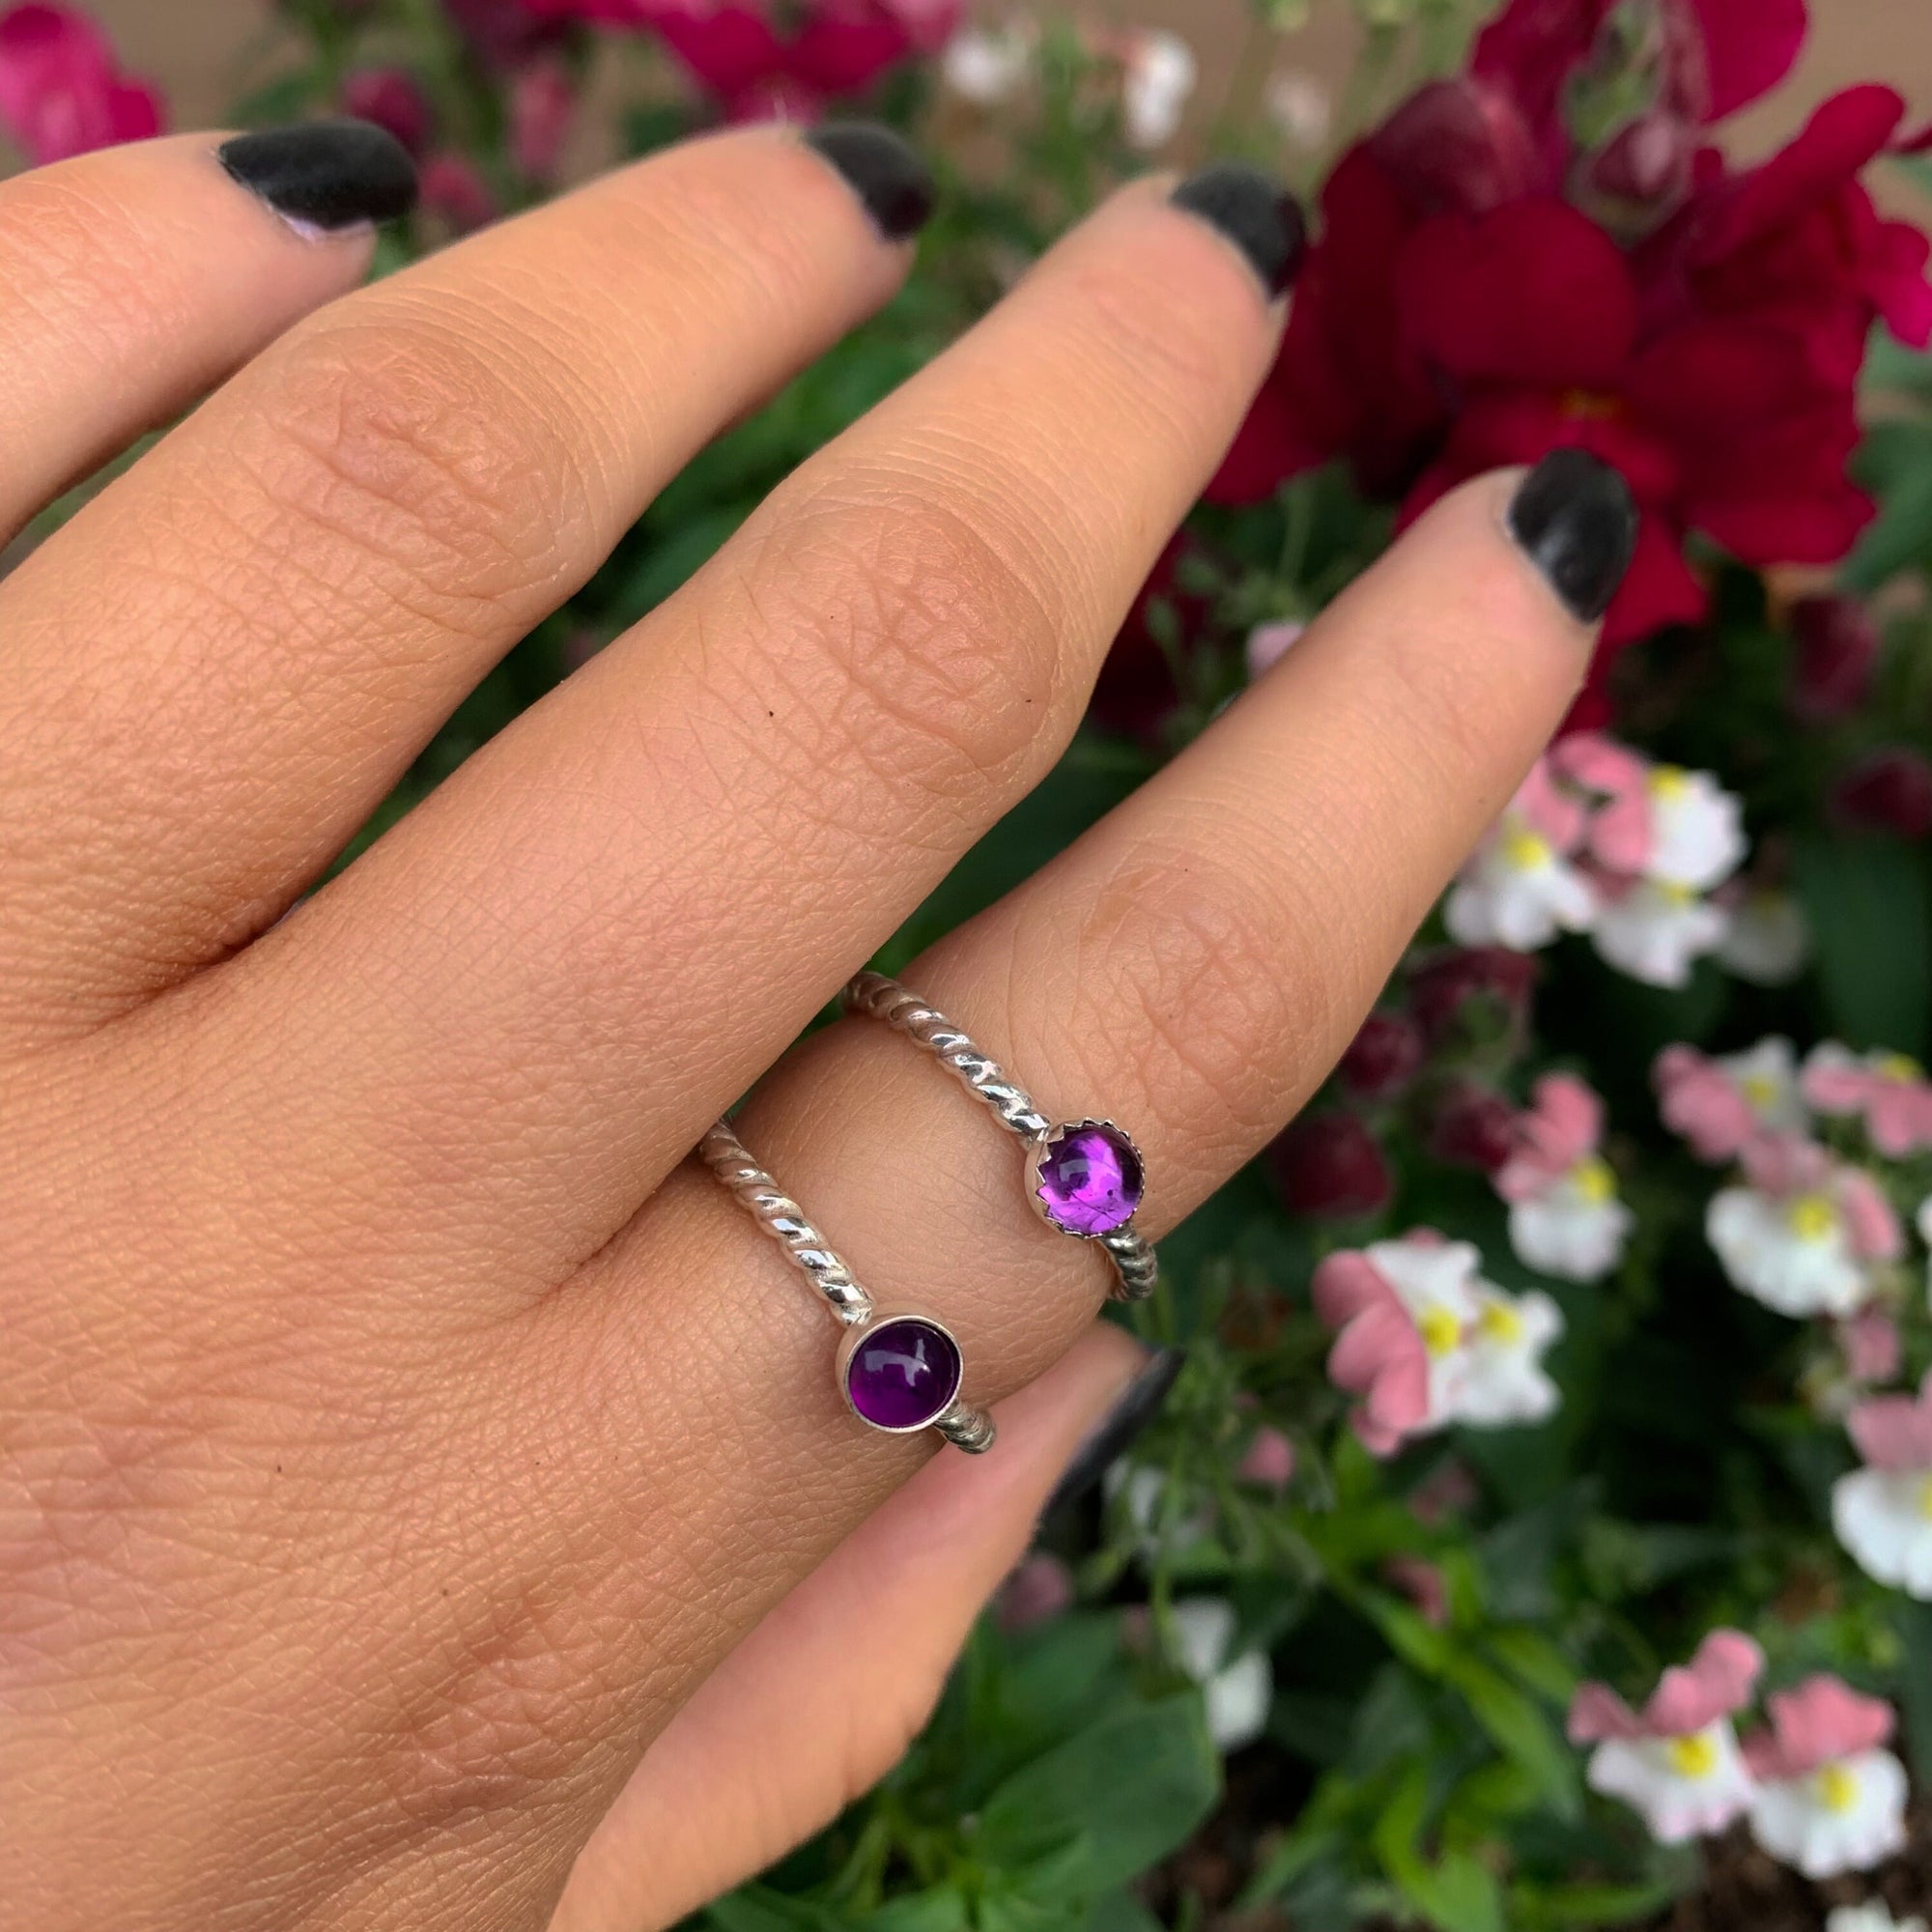 Amethyst Twist Ring - Made to Order 